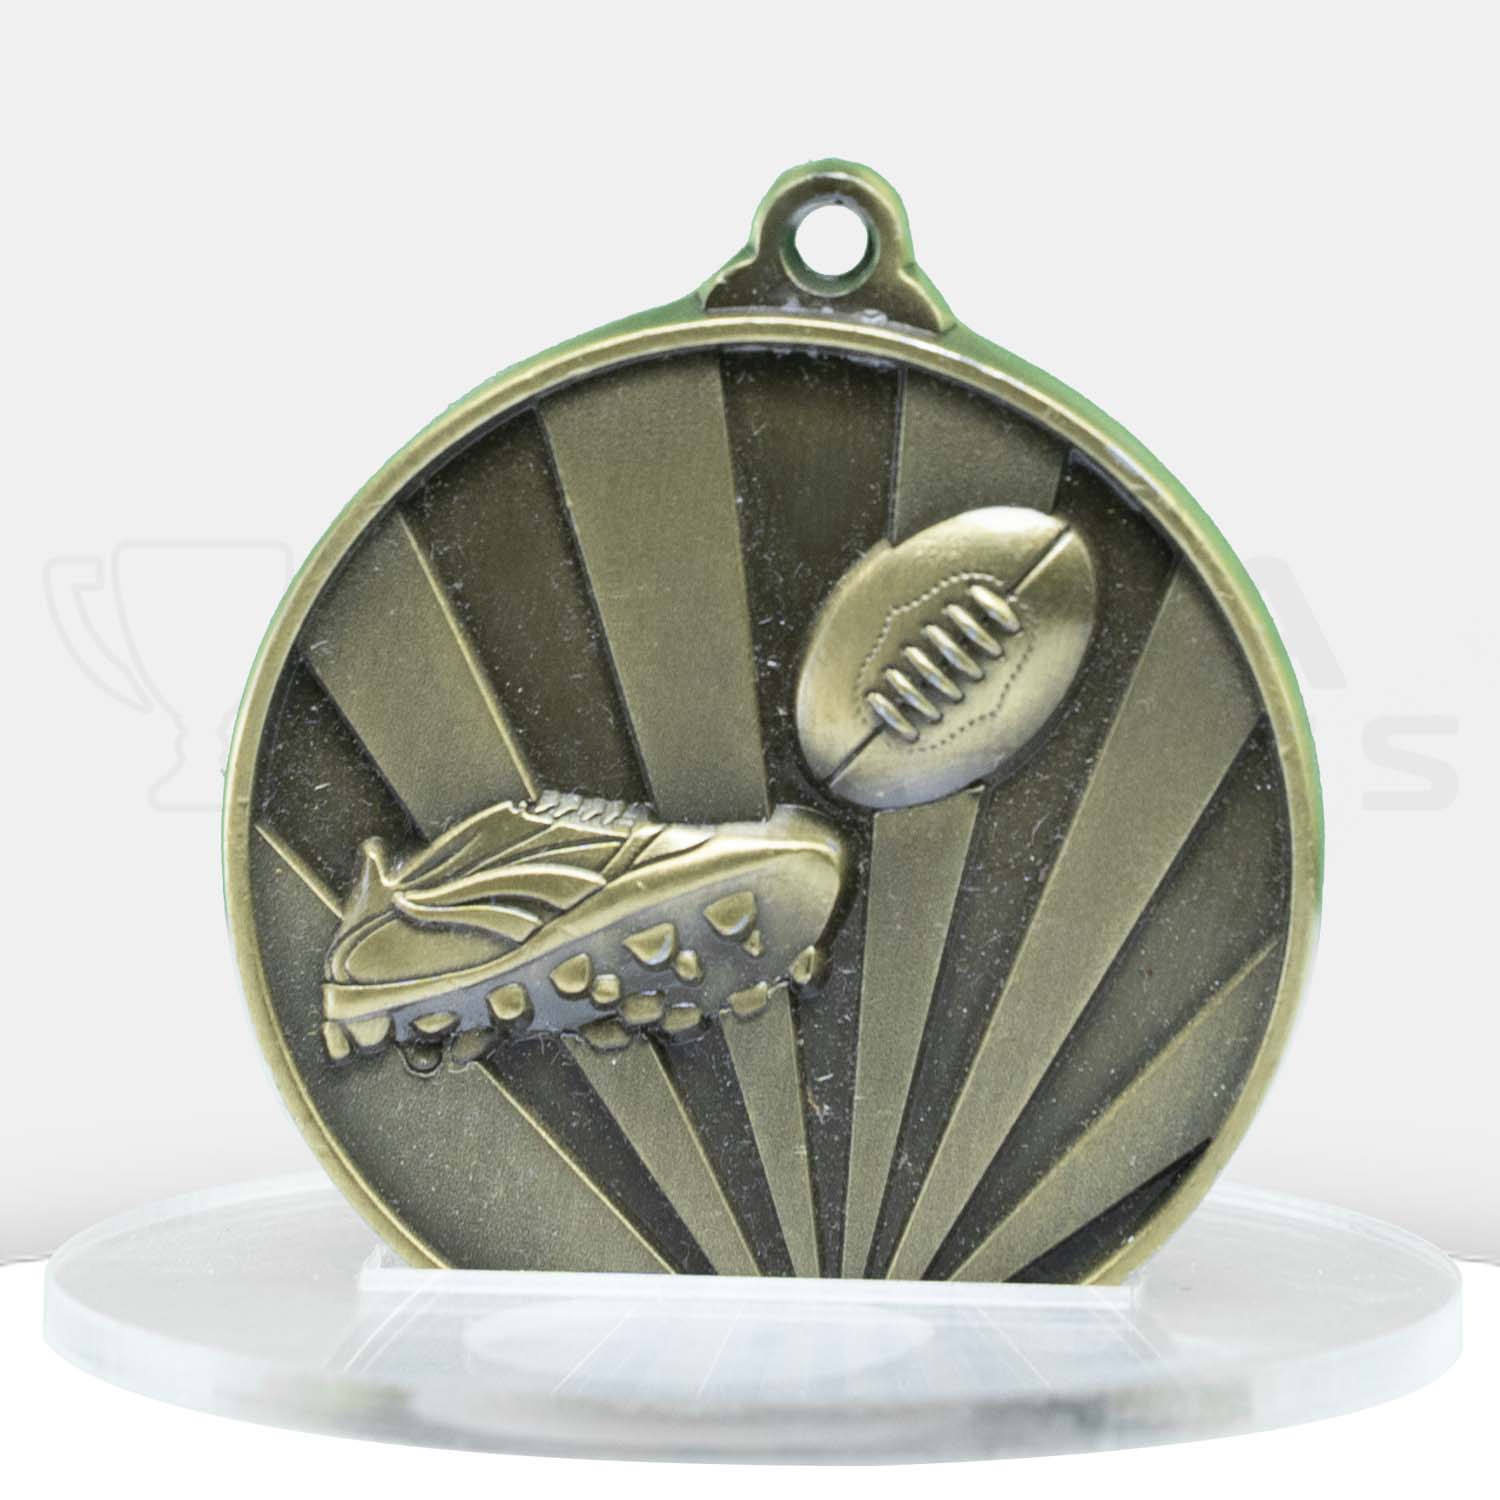 sunrise-medal-aussie-rules-gold-1077-3g-front